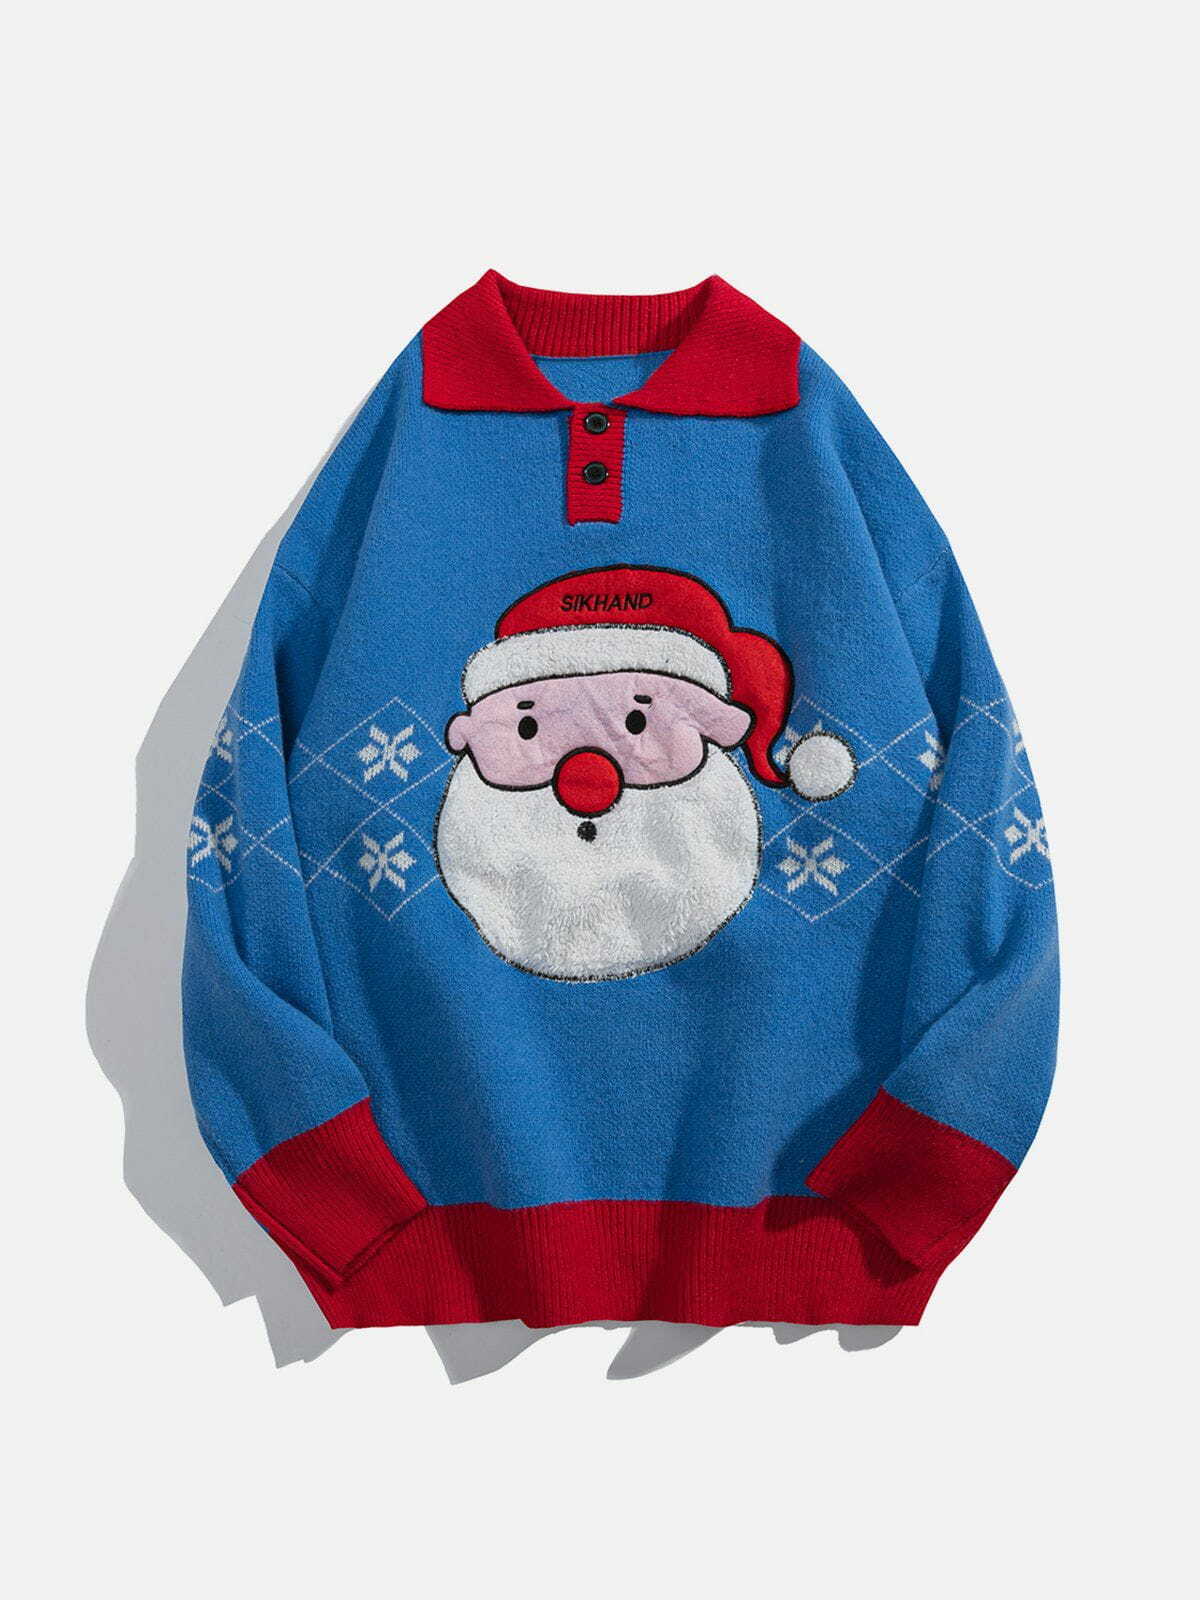 festive santa claus polo sweater playful & vibrant holiday style 4885